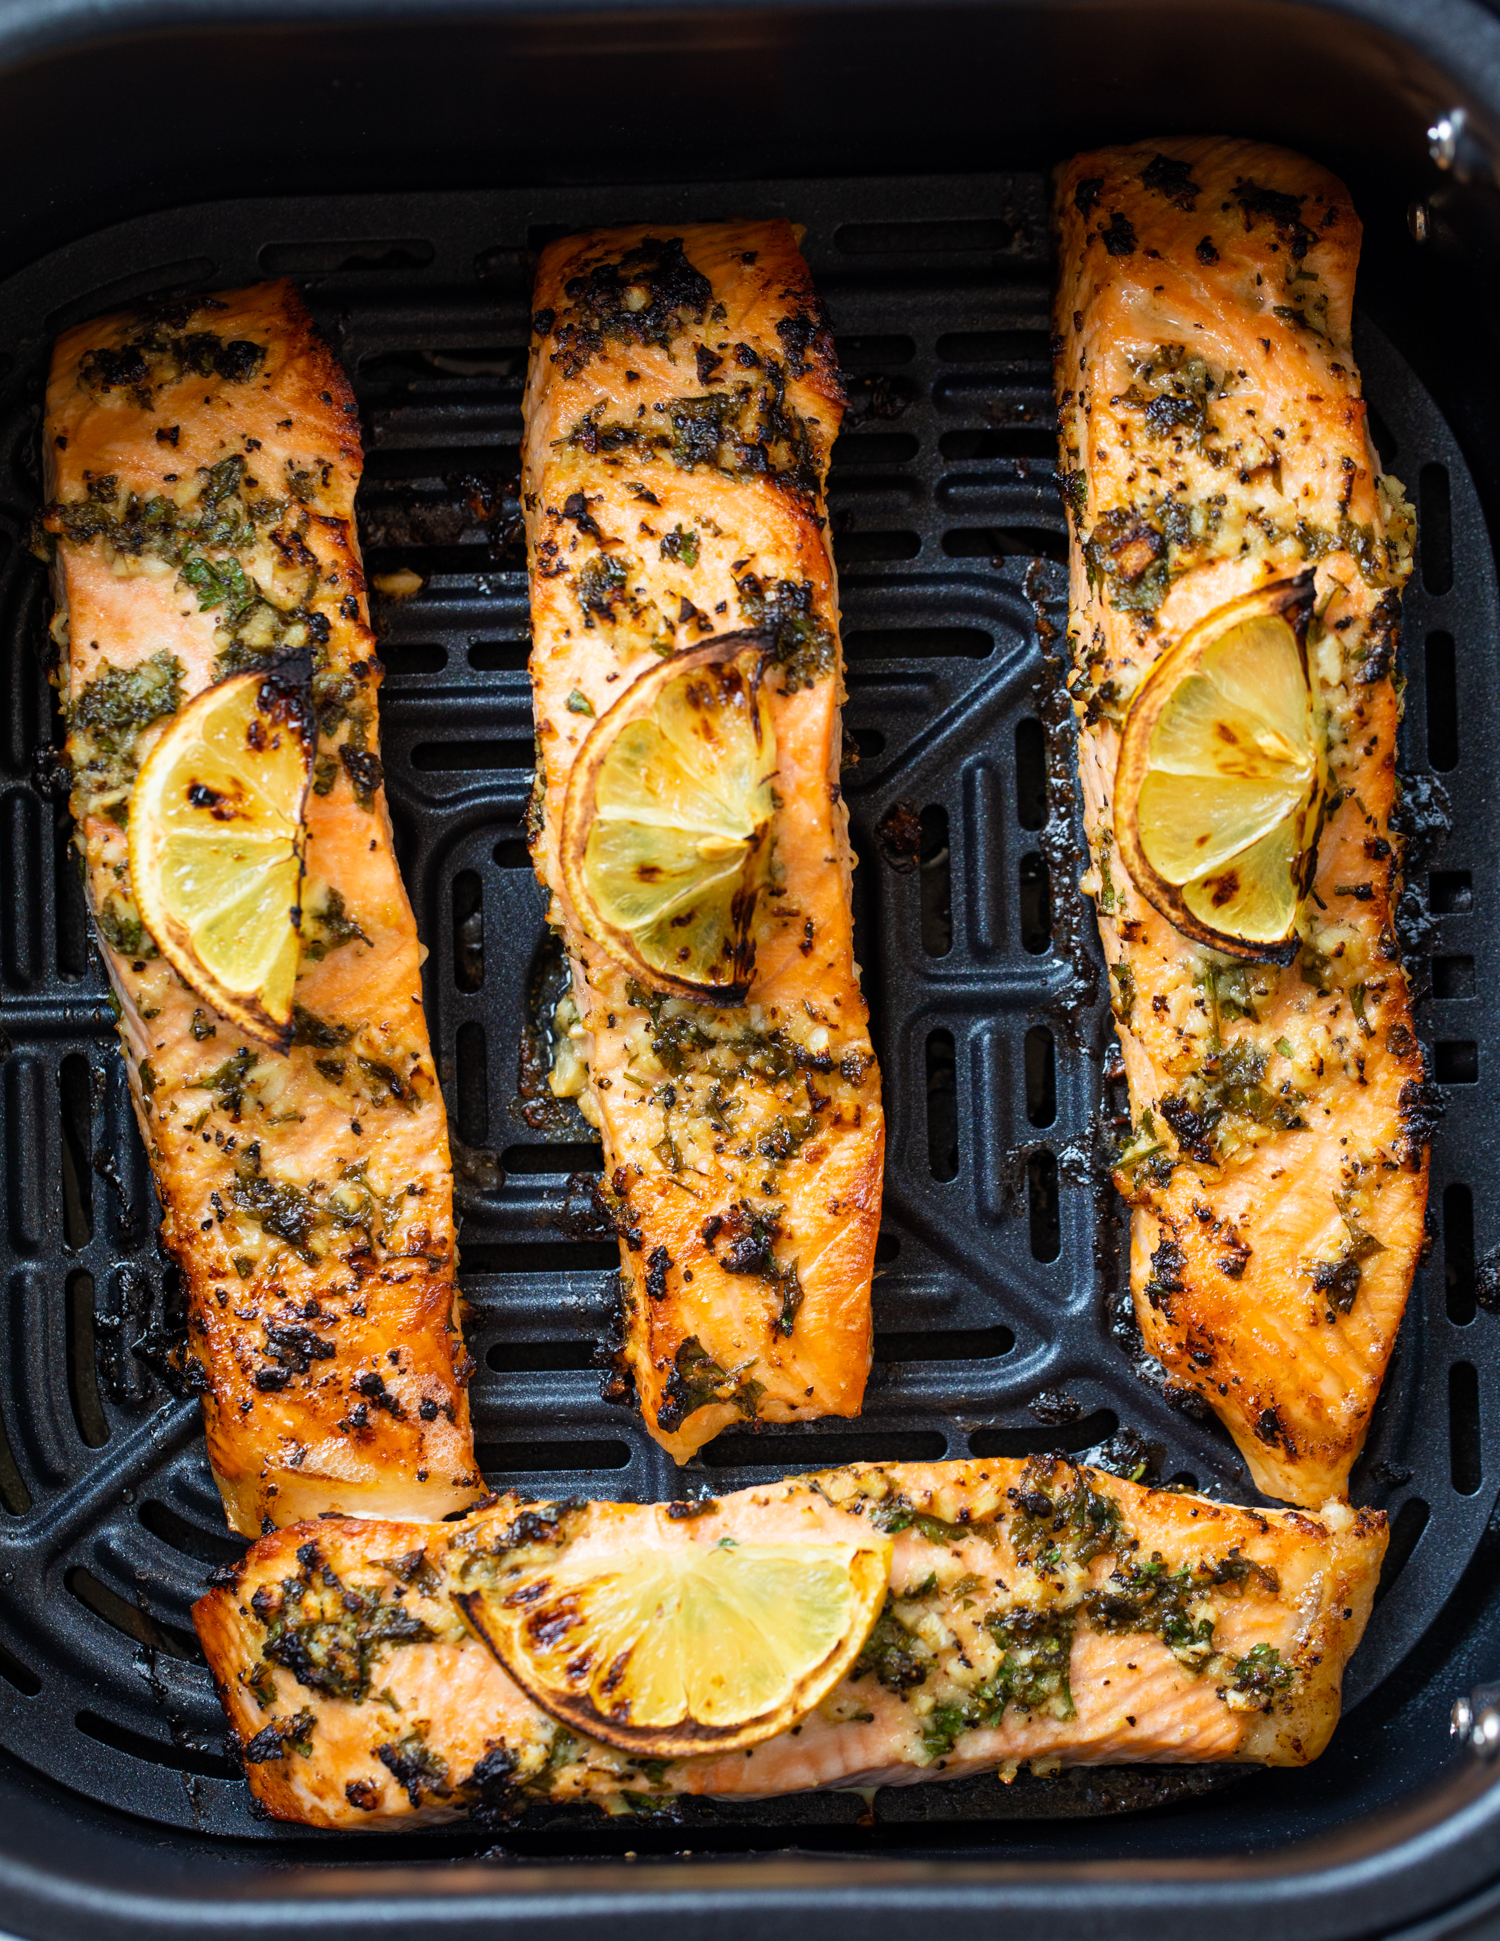 Salmon fillets cooking in an air fryer.